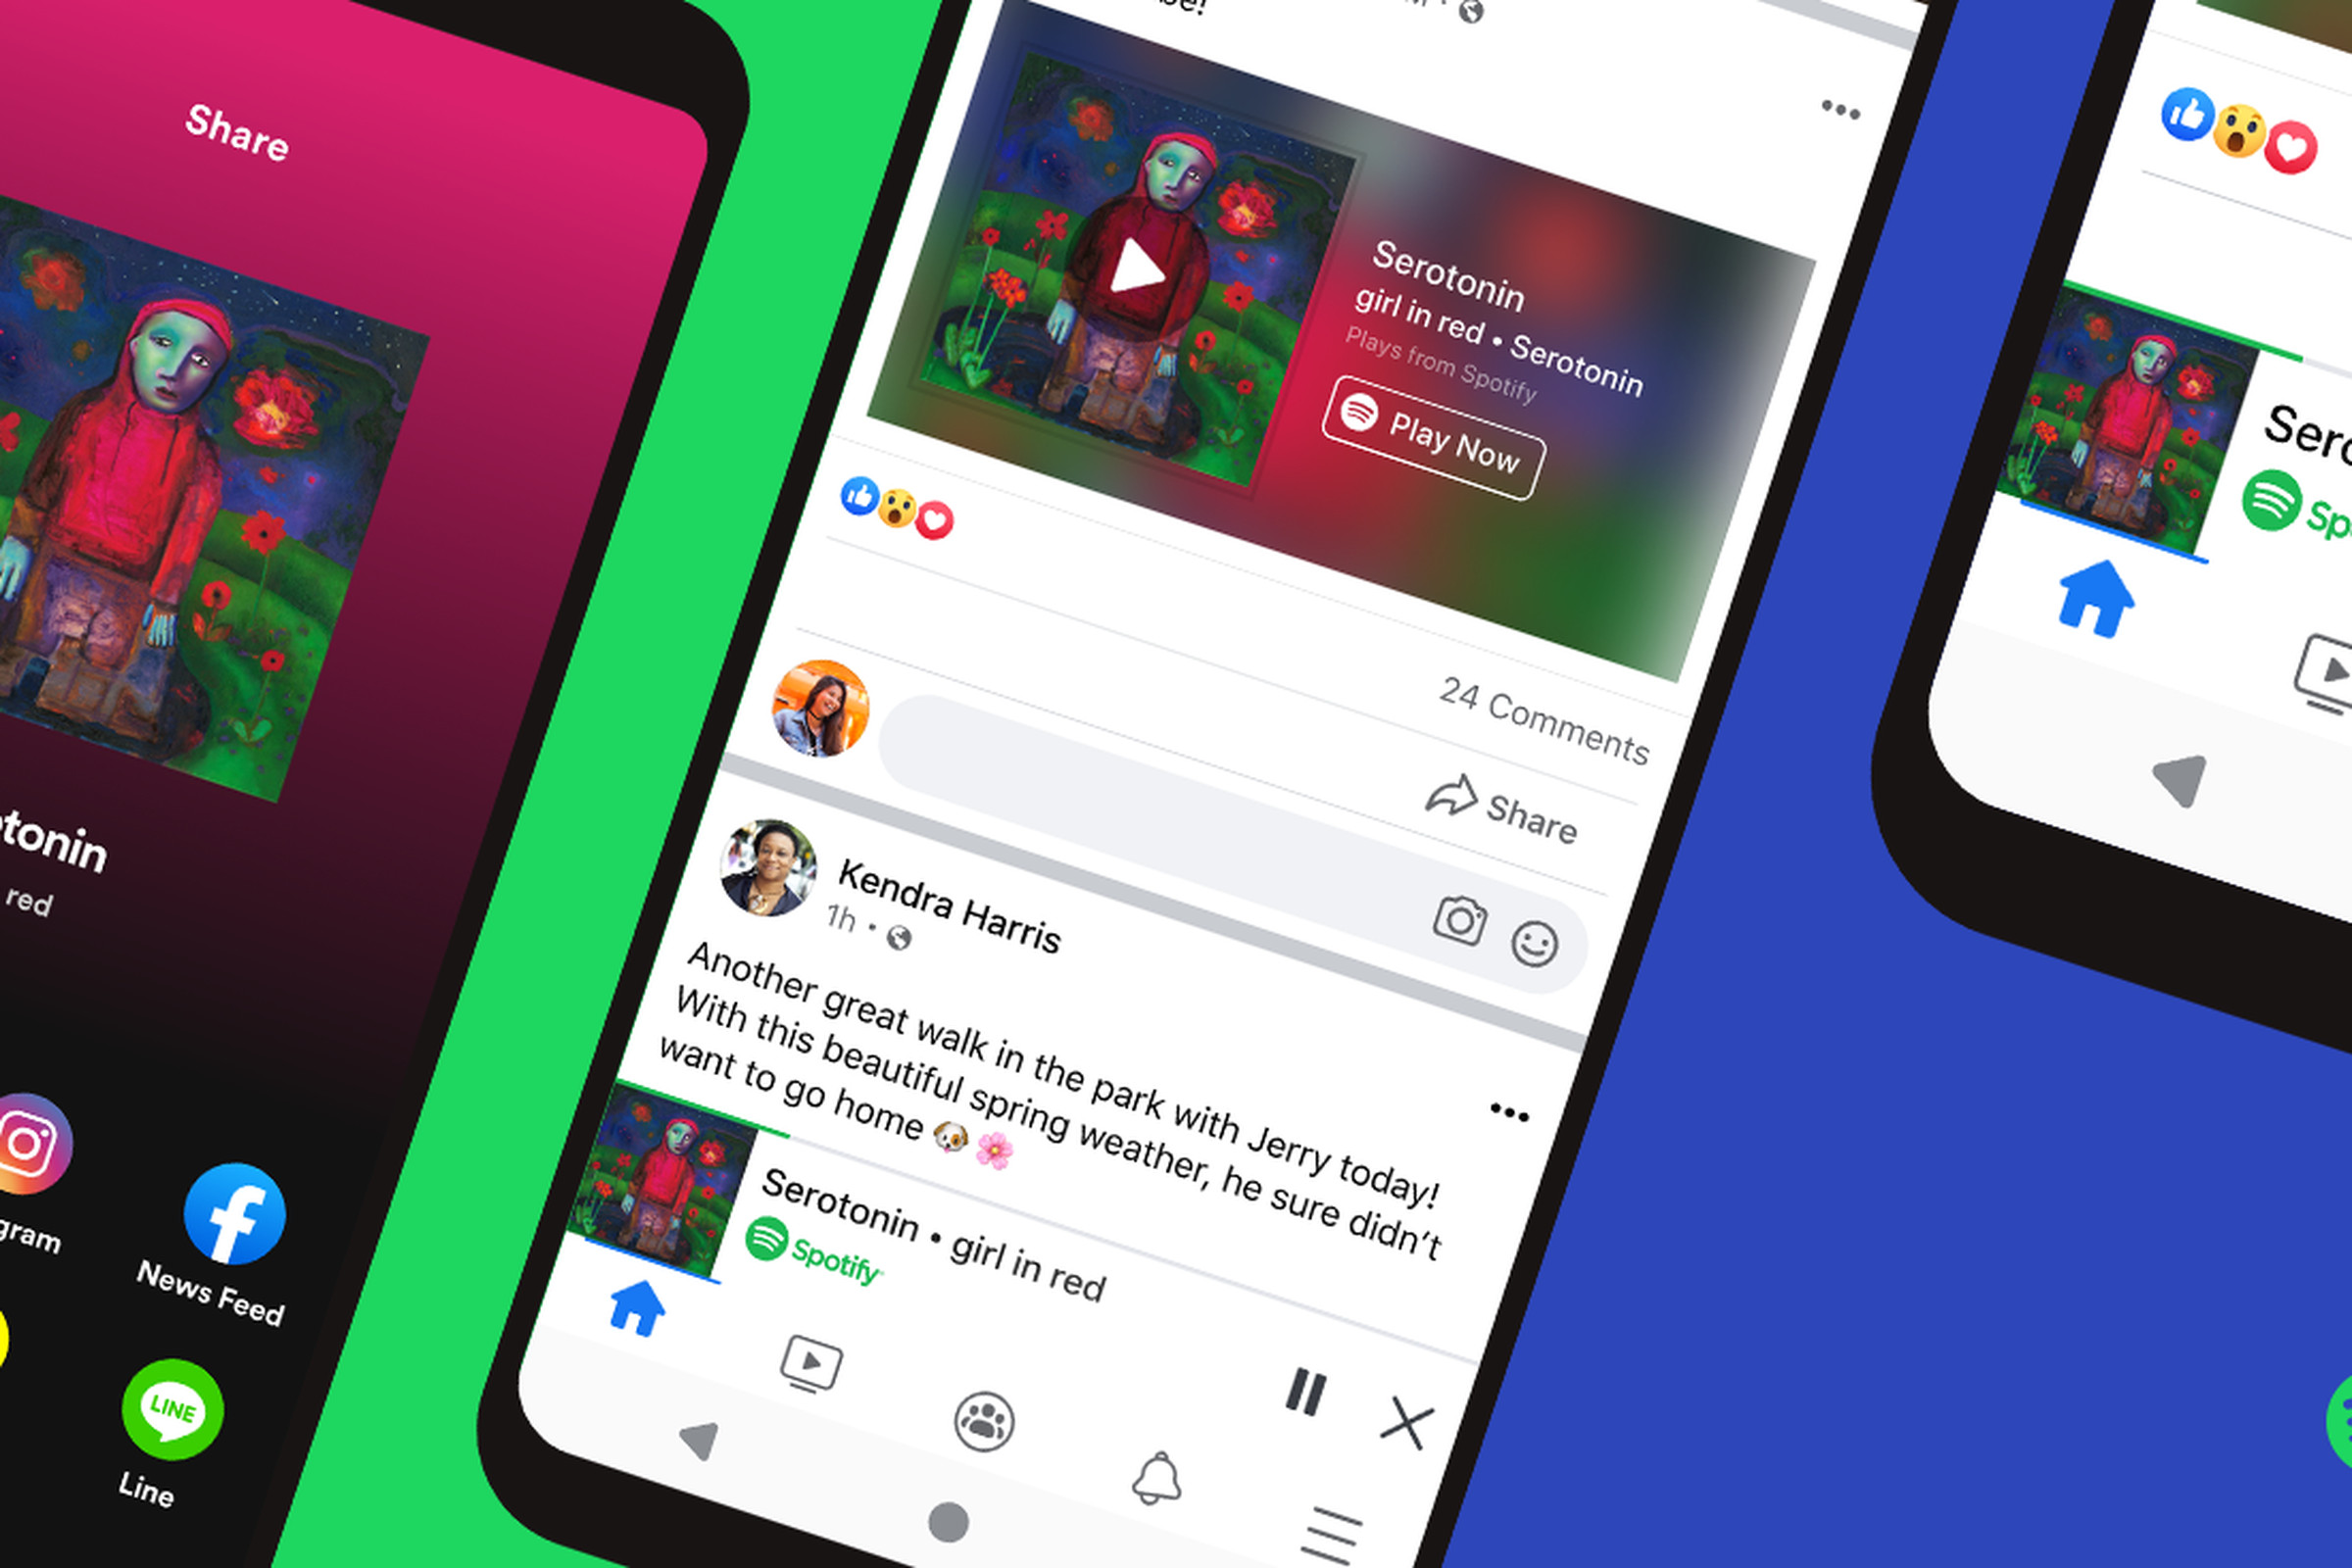 Spotify’s miniplayer will allow people to stream music and podcasts from their Facebook News Feed.